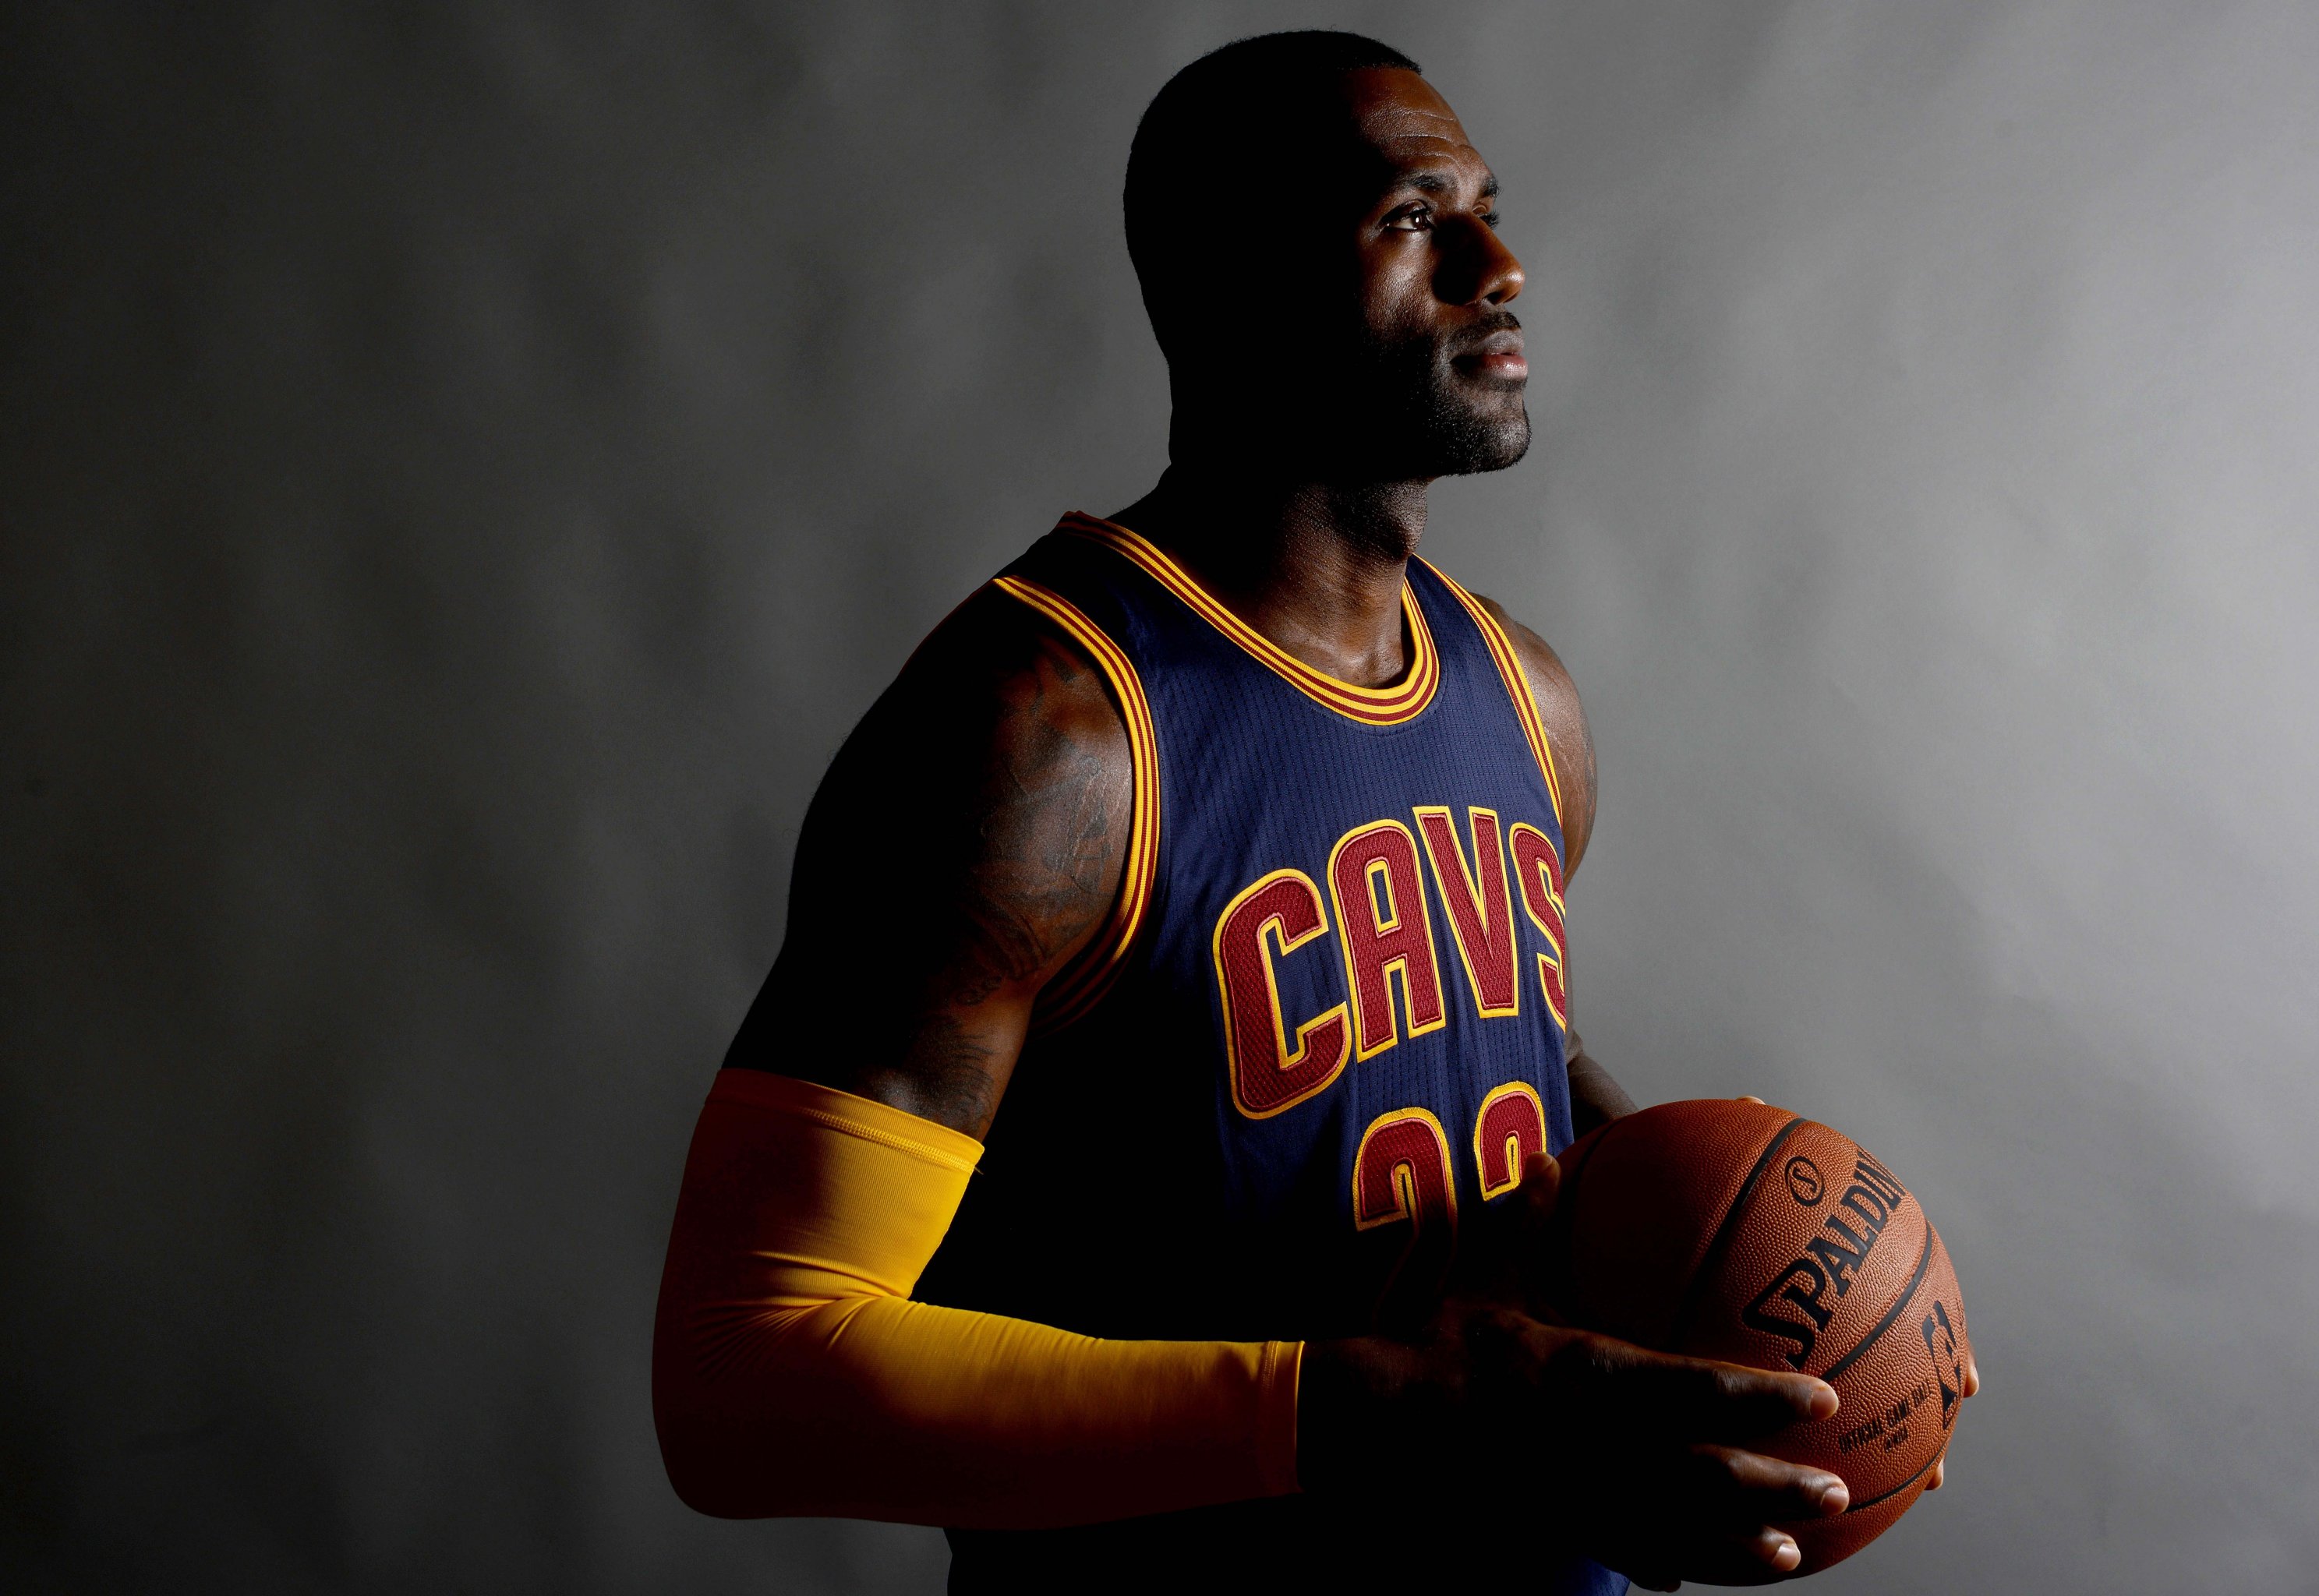 The Most Popular NBA Jerseys And Team Merchandise For 2015-16 Season